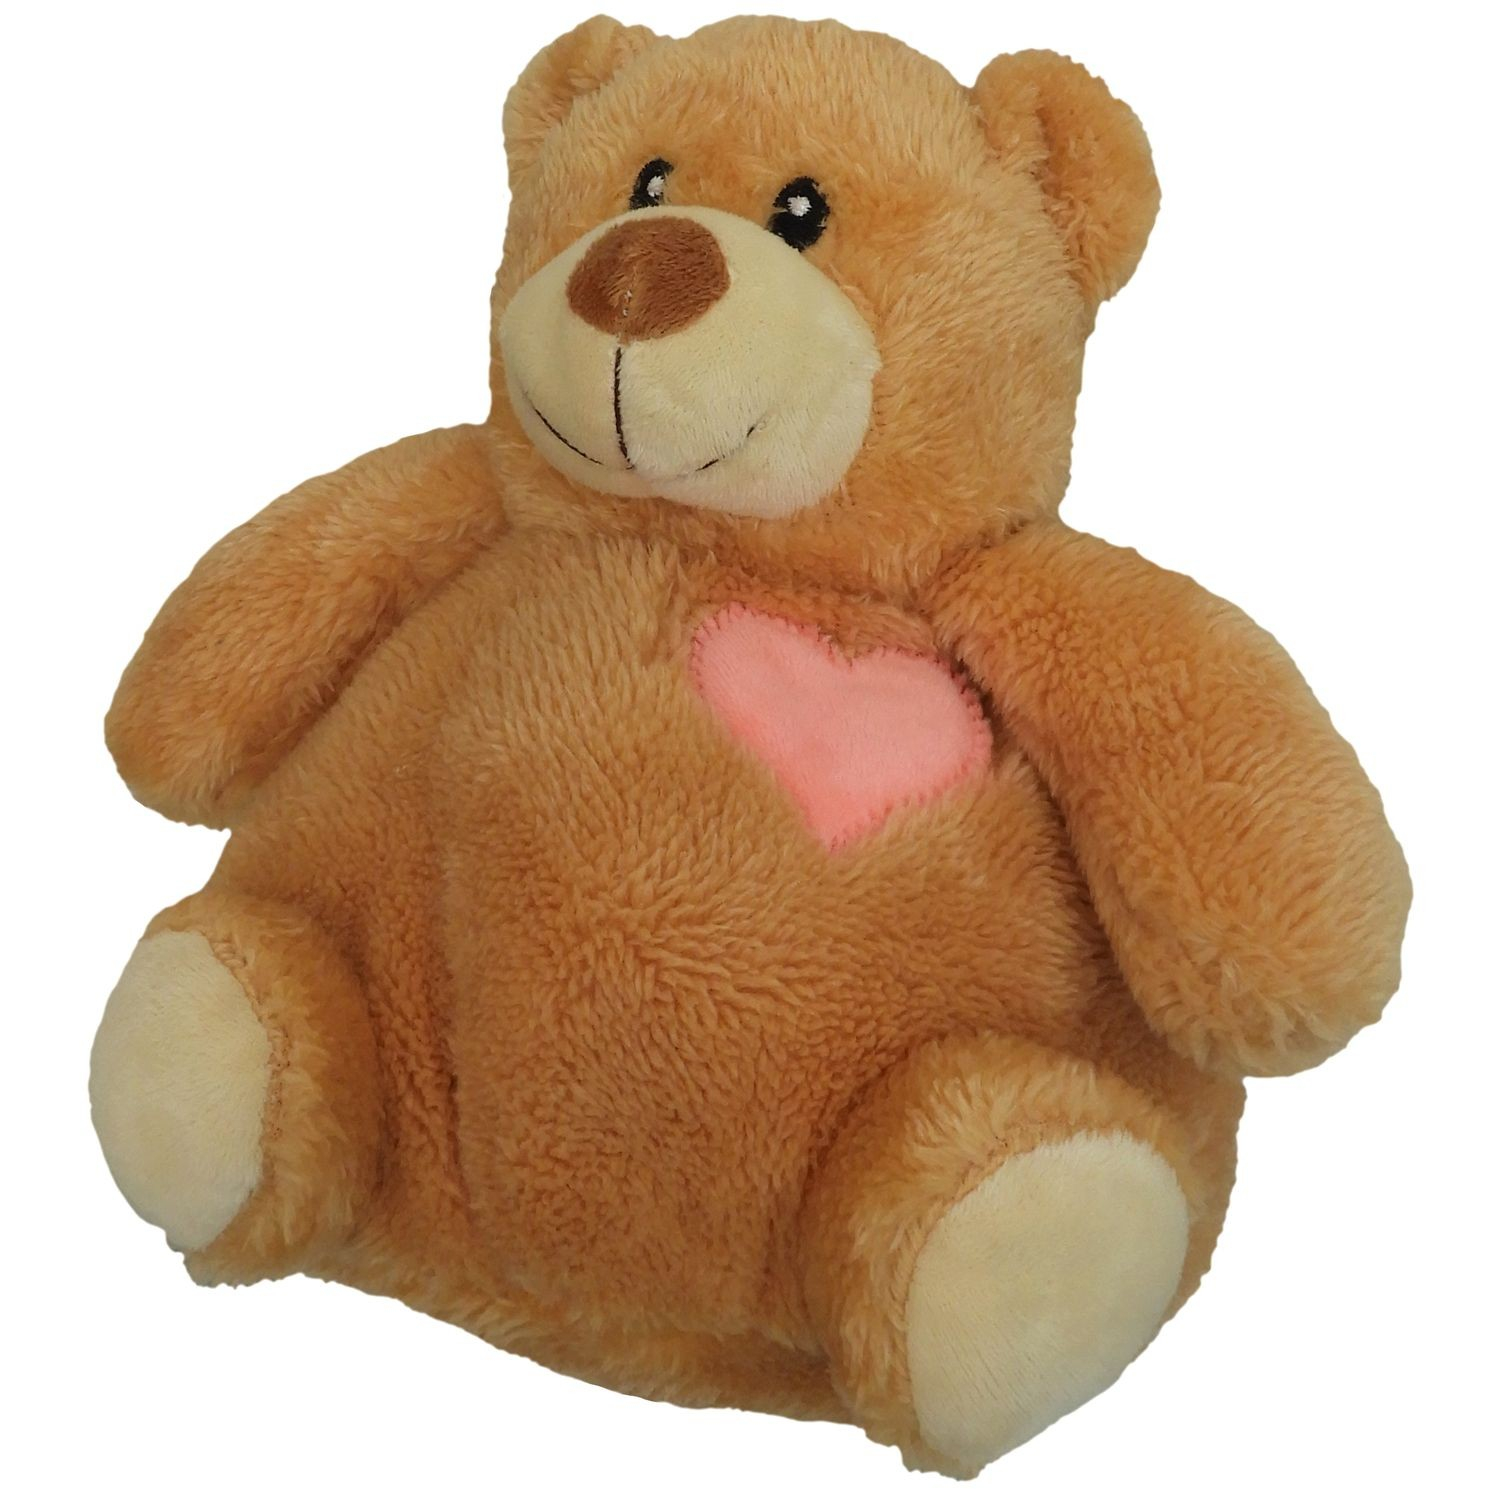 Orso in peluche per cane Teddy Soothers - 30cm - Anti-stress